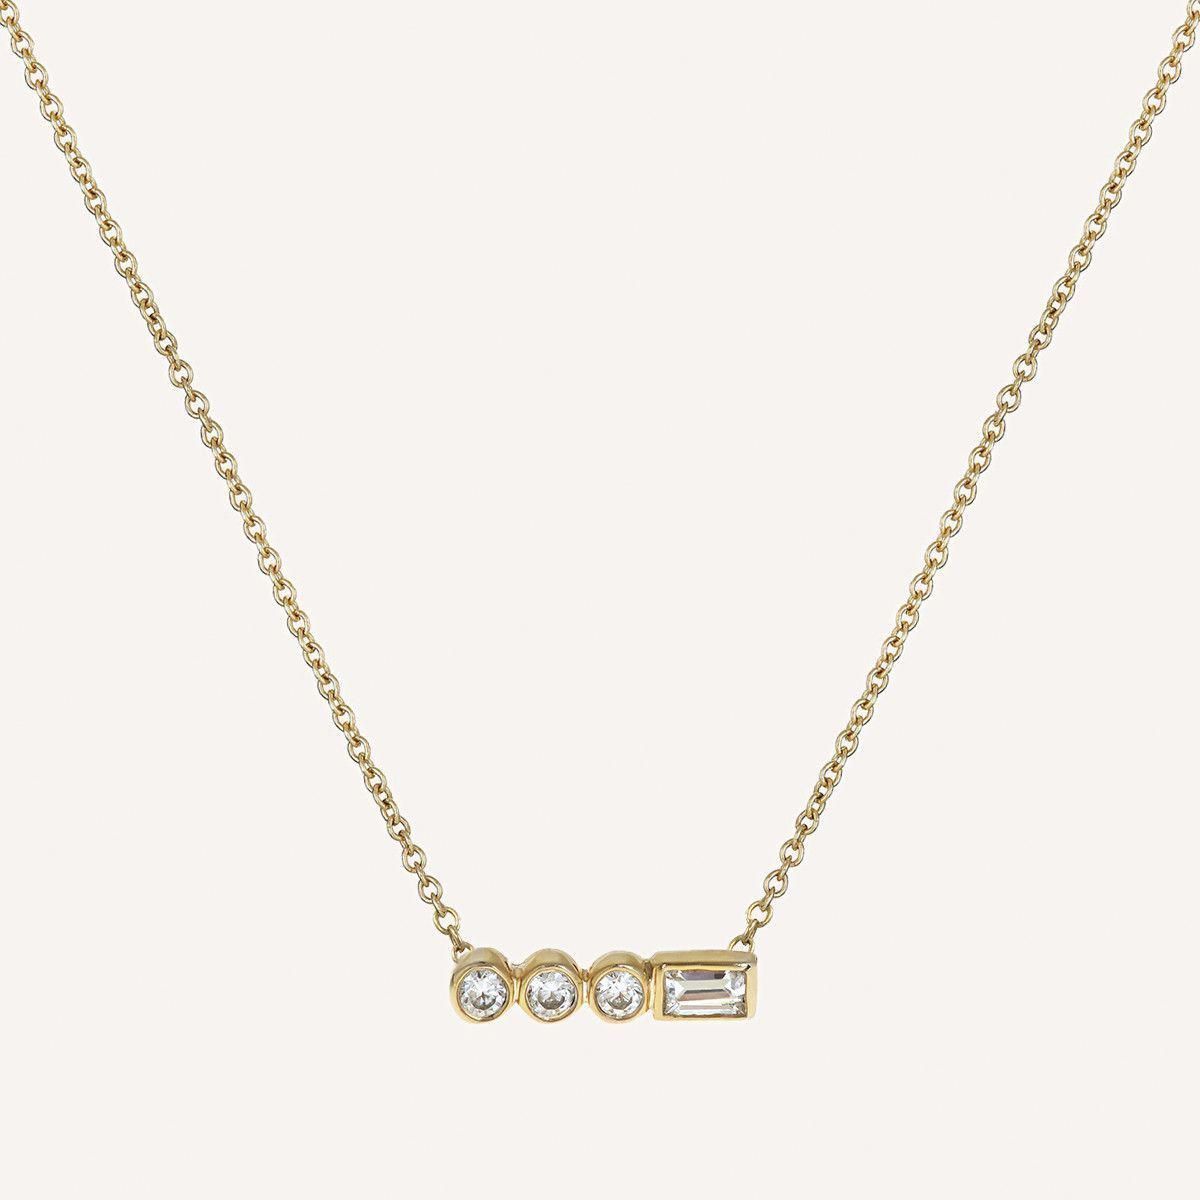 Diamond Necklace Cartier  2583 #diamondnecklacecartier With Regard To Most Current Offset Freshwater Cultured Pearl Circle Necklaces (View 24 of 25)